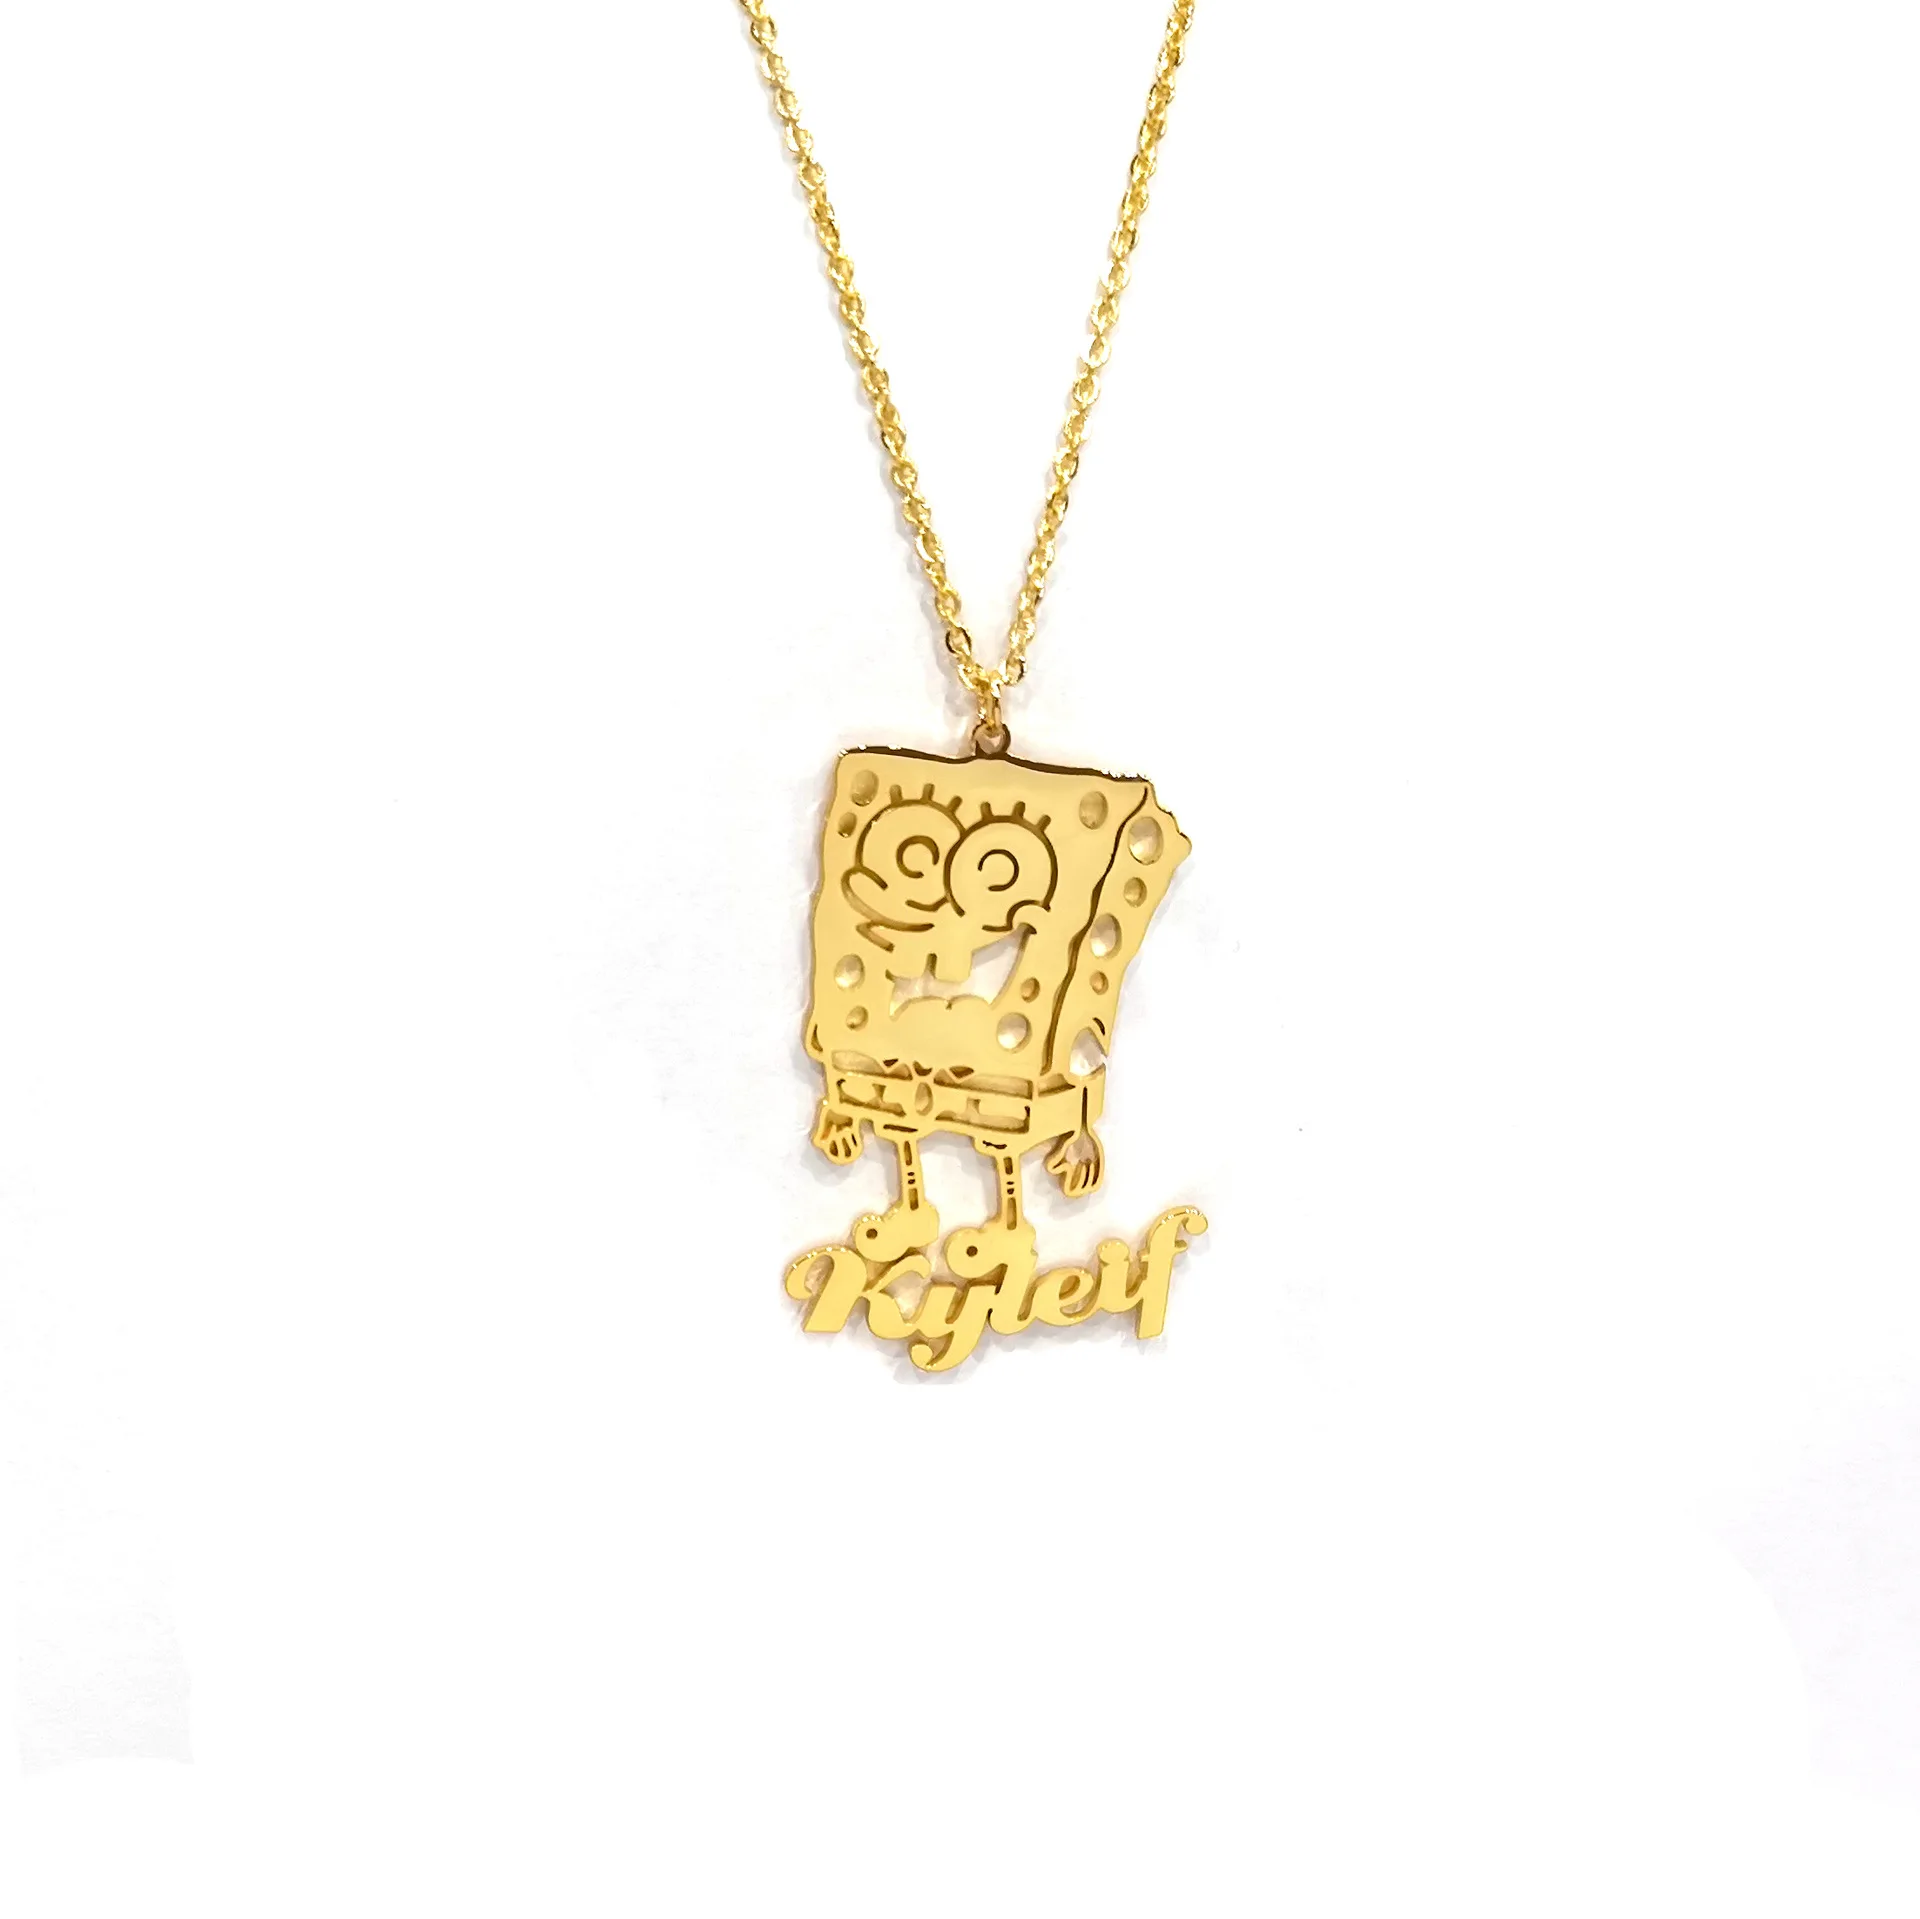 Qiuhan Unique Design 18 K Gold Plated Pendant Kids Stainless Steel Jewelry  Custom Name Cartoon Character Necklaces - Buy Custom Name Cartoon Character  Necklaces,Stainless Steel Necklaces,18 K Gold Plated Necklace Product on